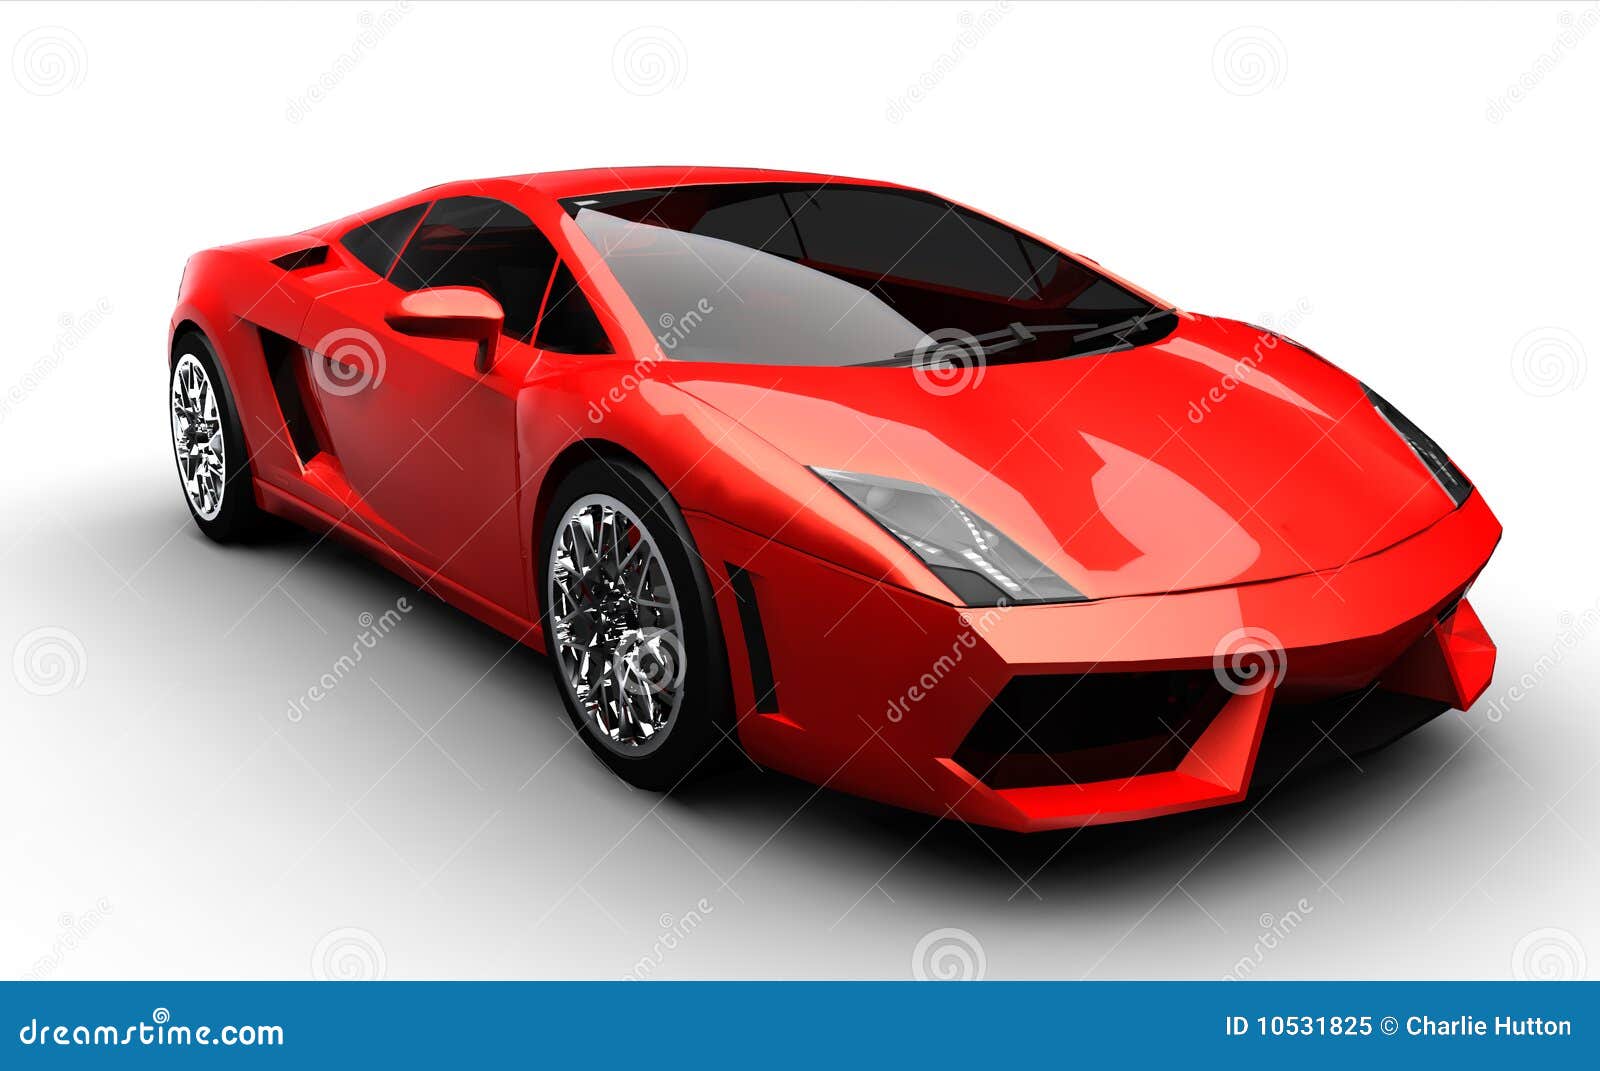 Red Sports Car Royalty Free Stock Photo  Image: 10531825